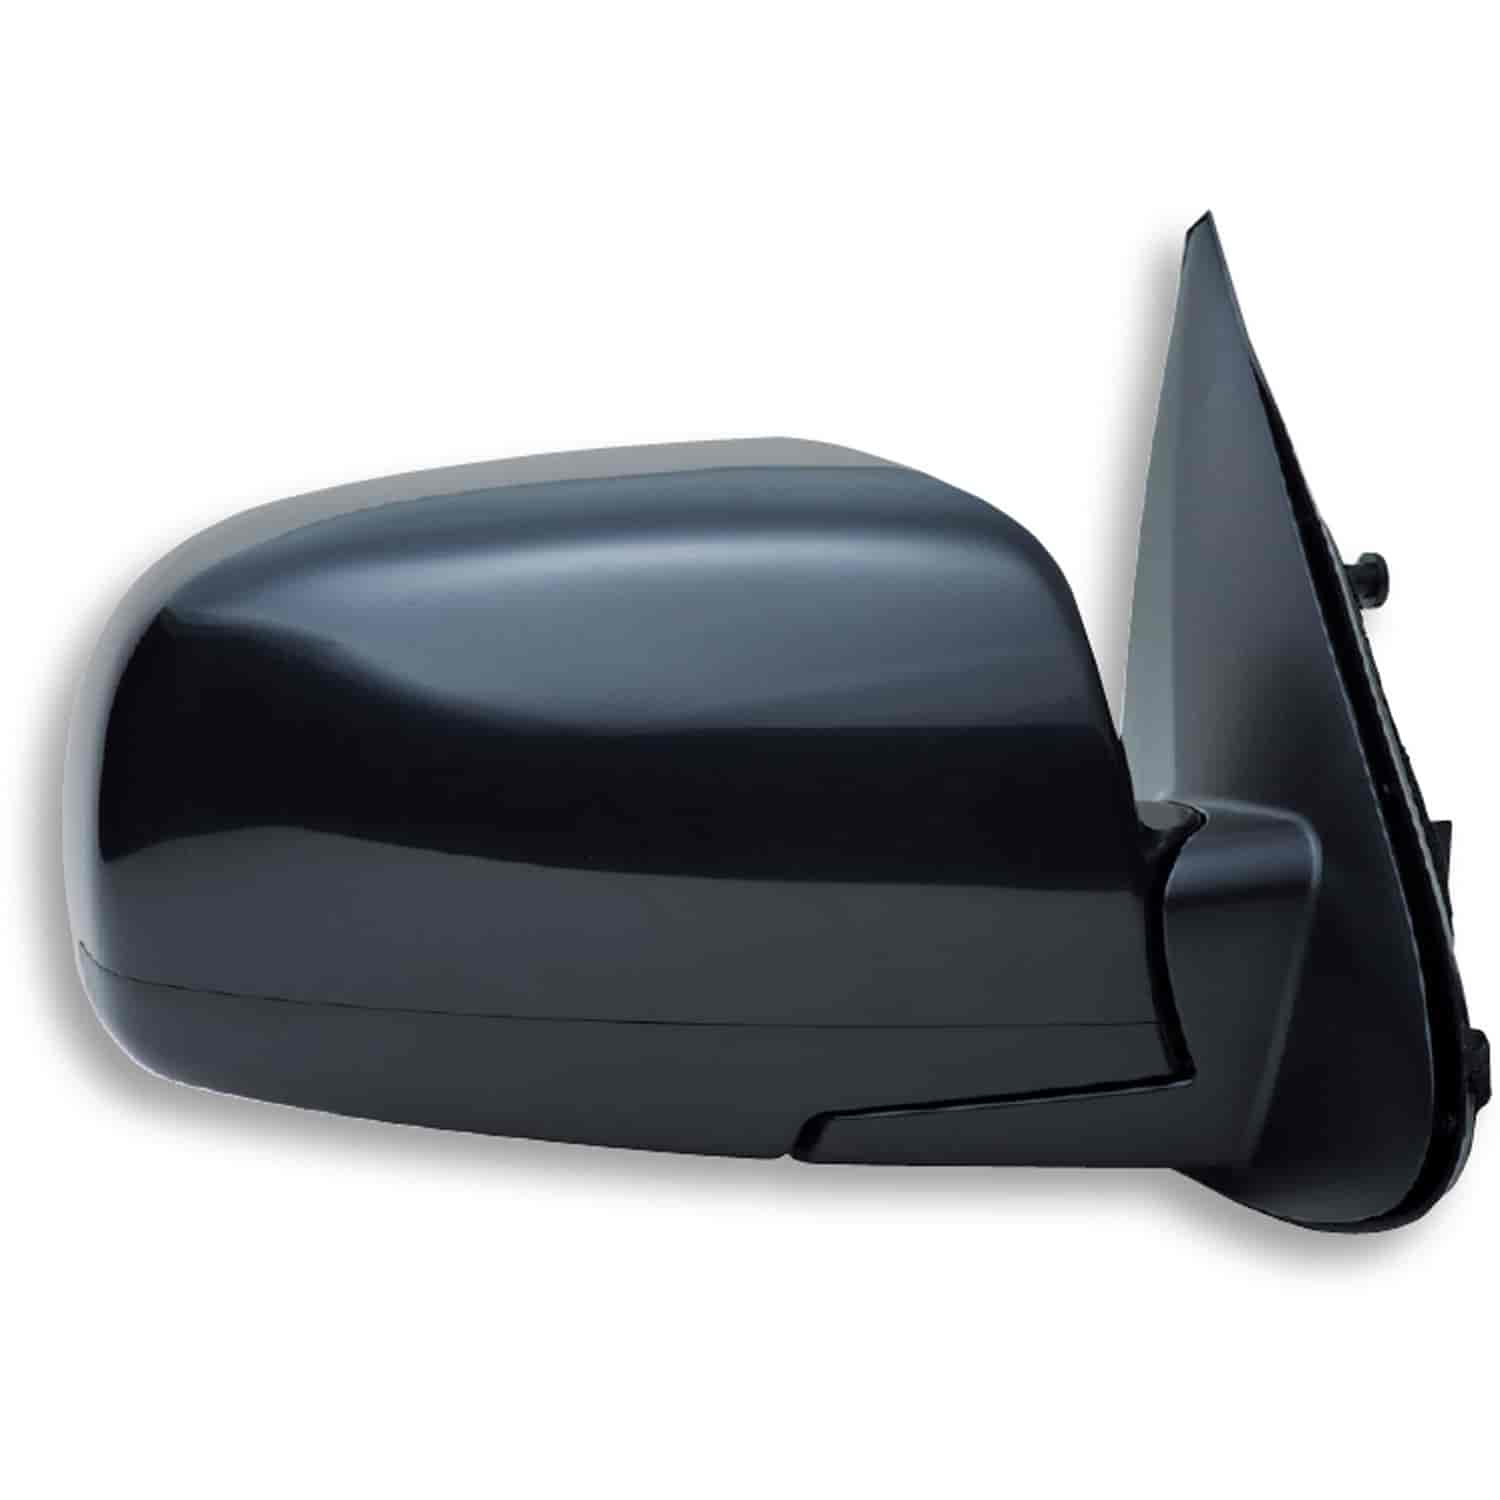 OEM Style Replacement mirror for 07-08 Hyundai Santa Fe passenger side mirror tested to fit and func